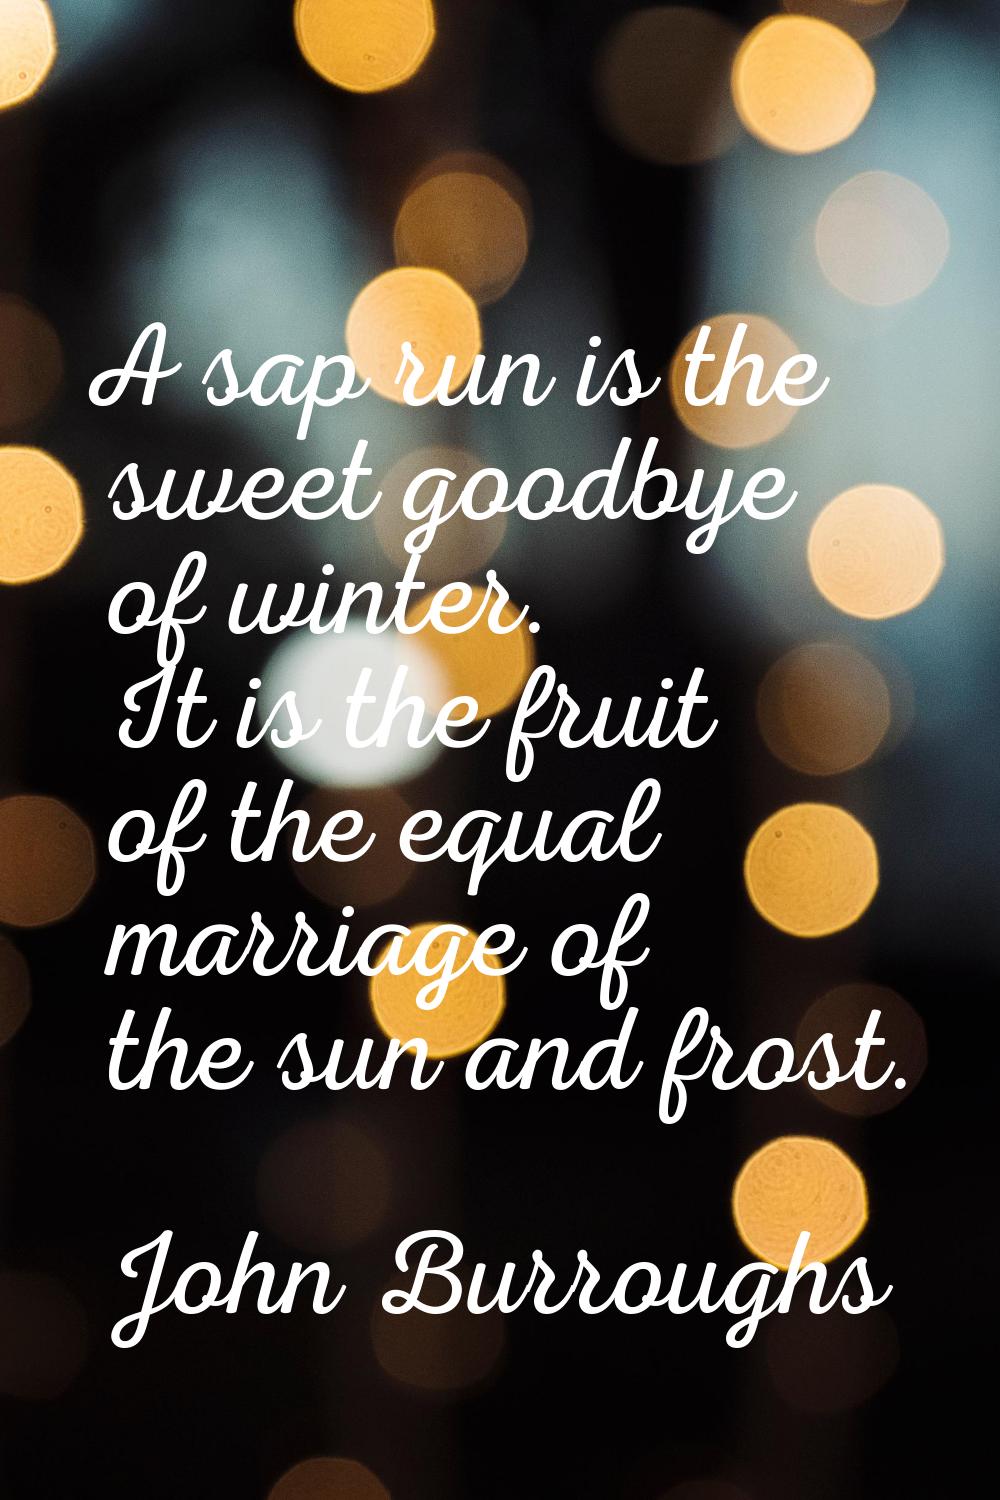 A sap run is the sweet goodbye of winter. It is the fruit of the equal marriage of the sun and fros